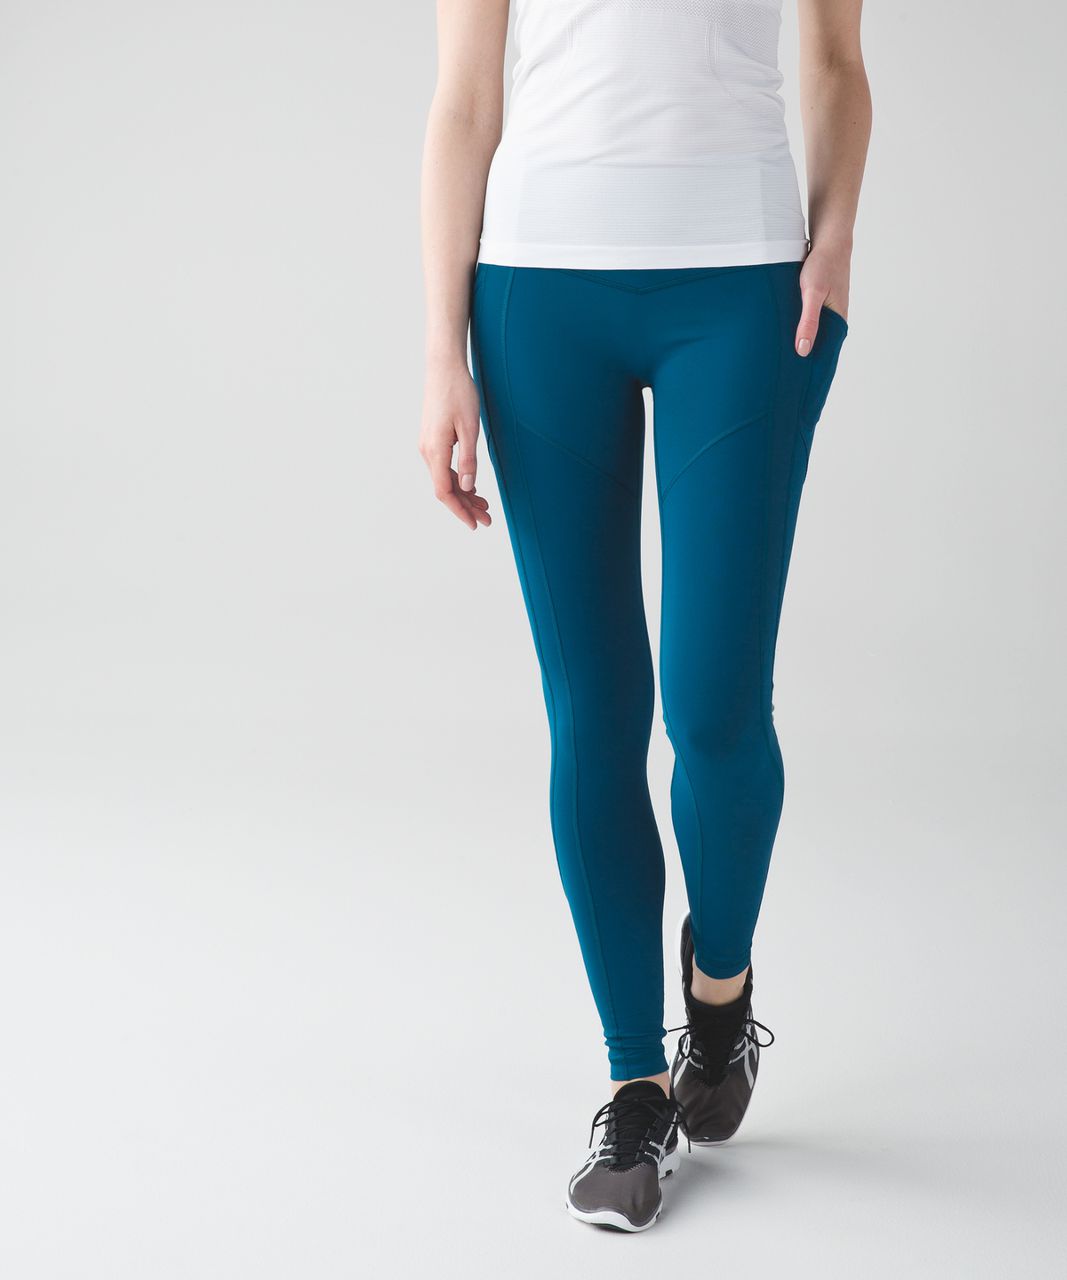 Lululemon All The Right Places Pant II - Tofino Teal